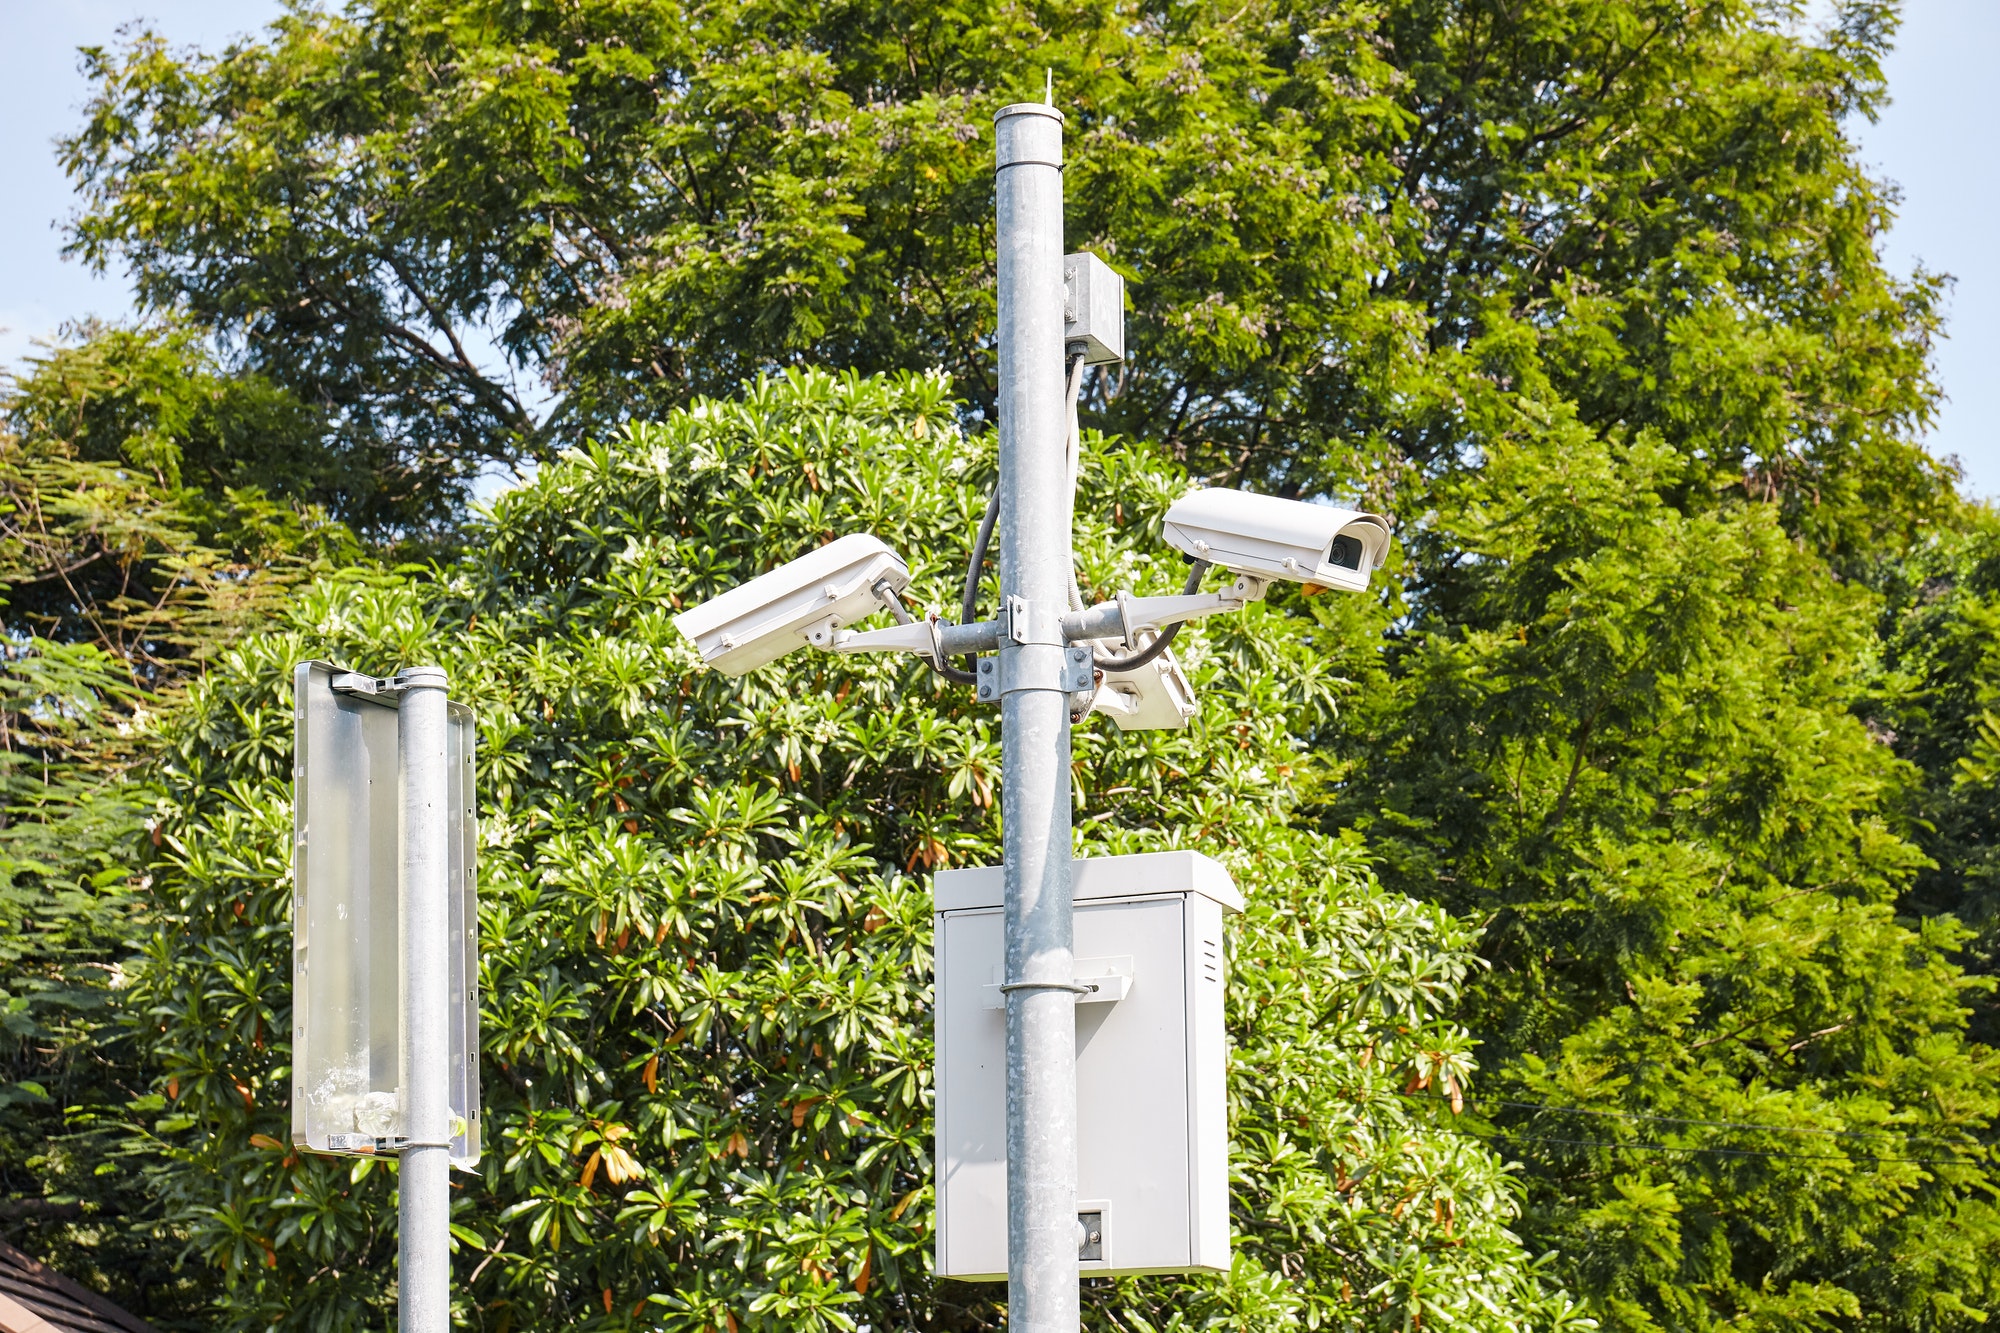 Security cameras or Surveillance CCTV outdoors in the public park with green tree background